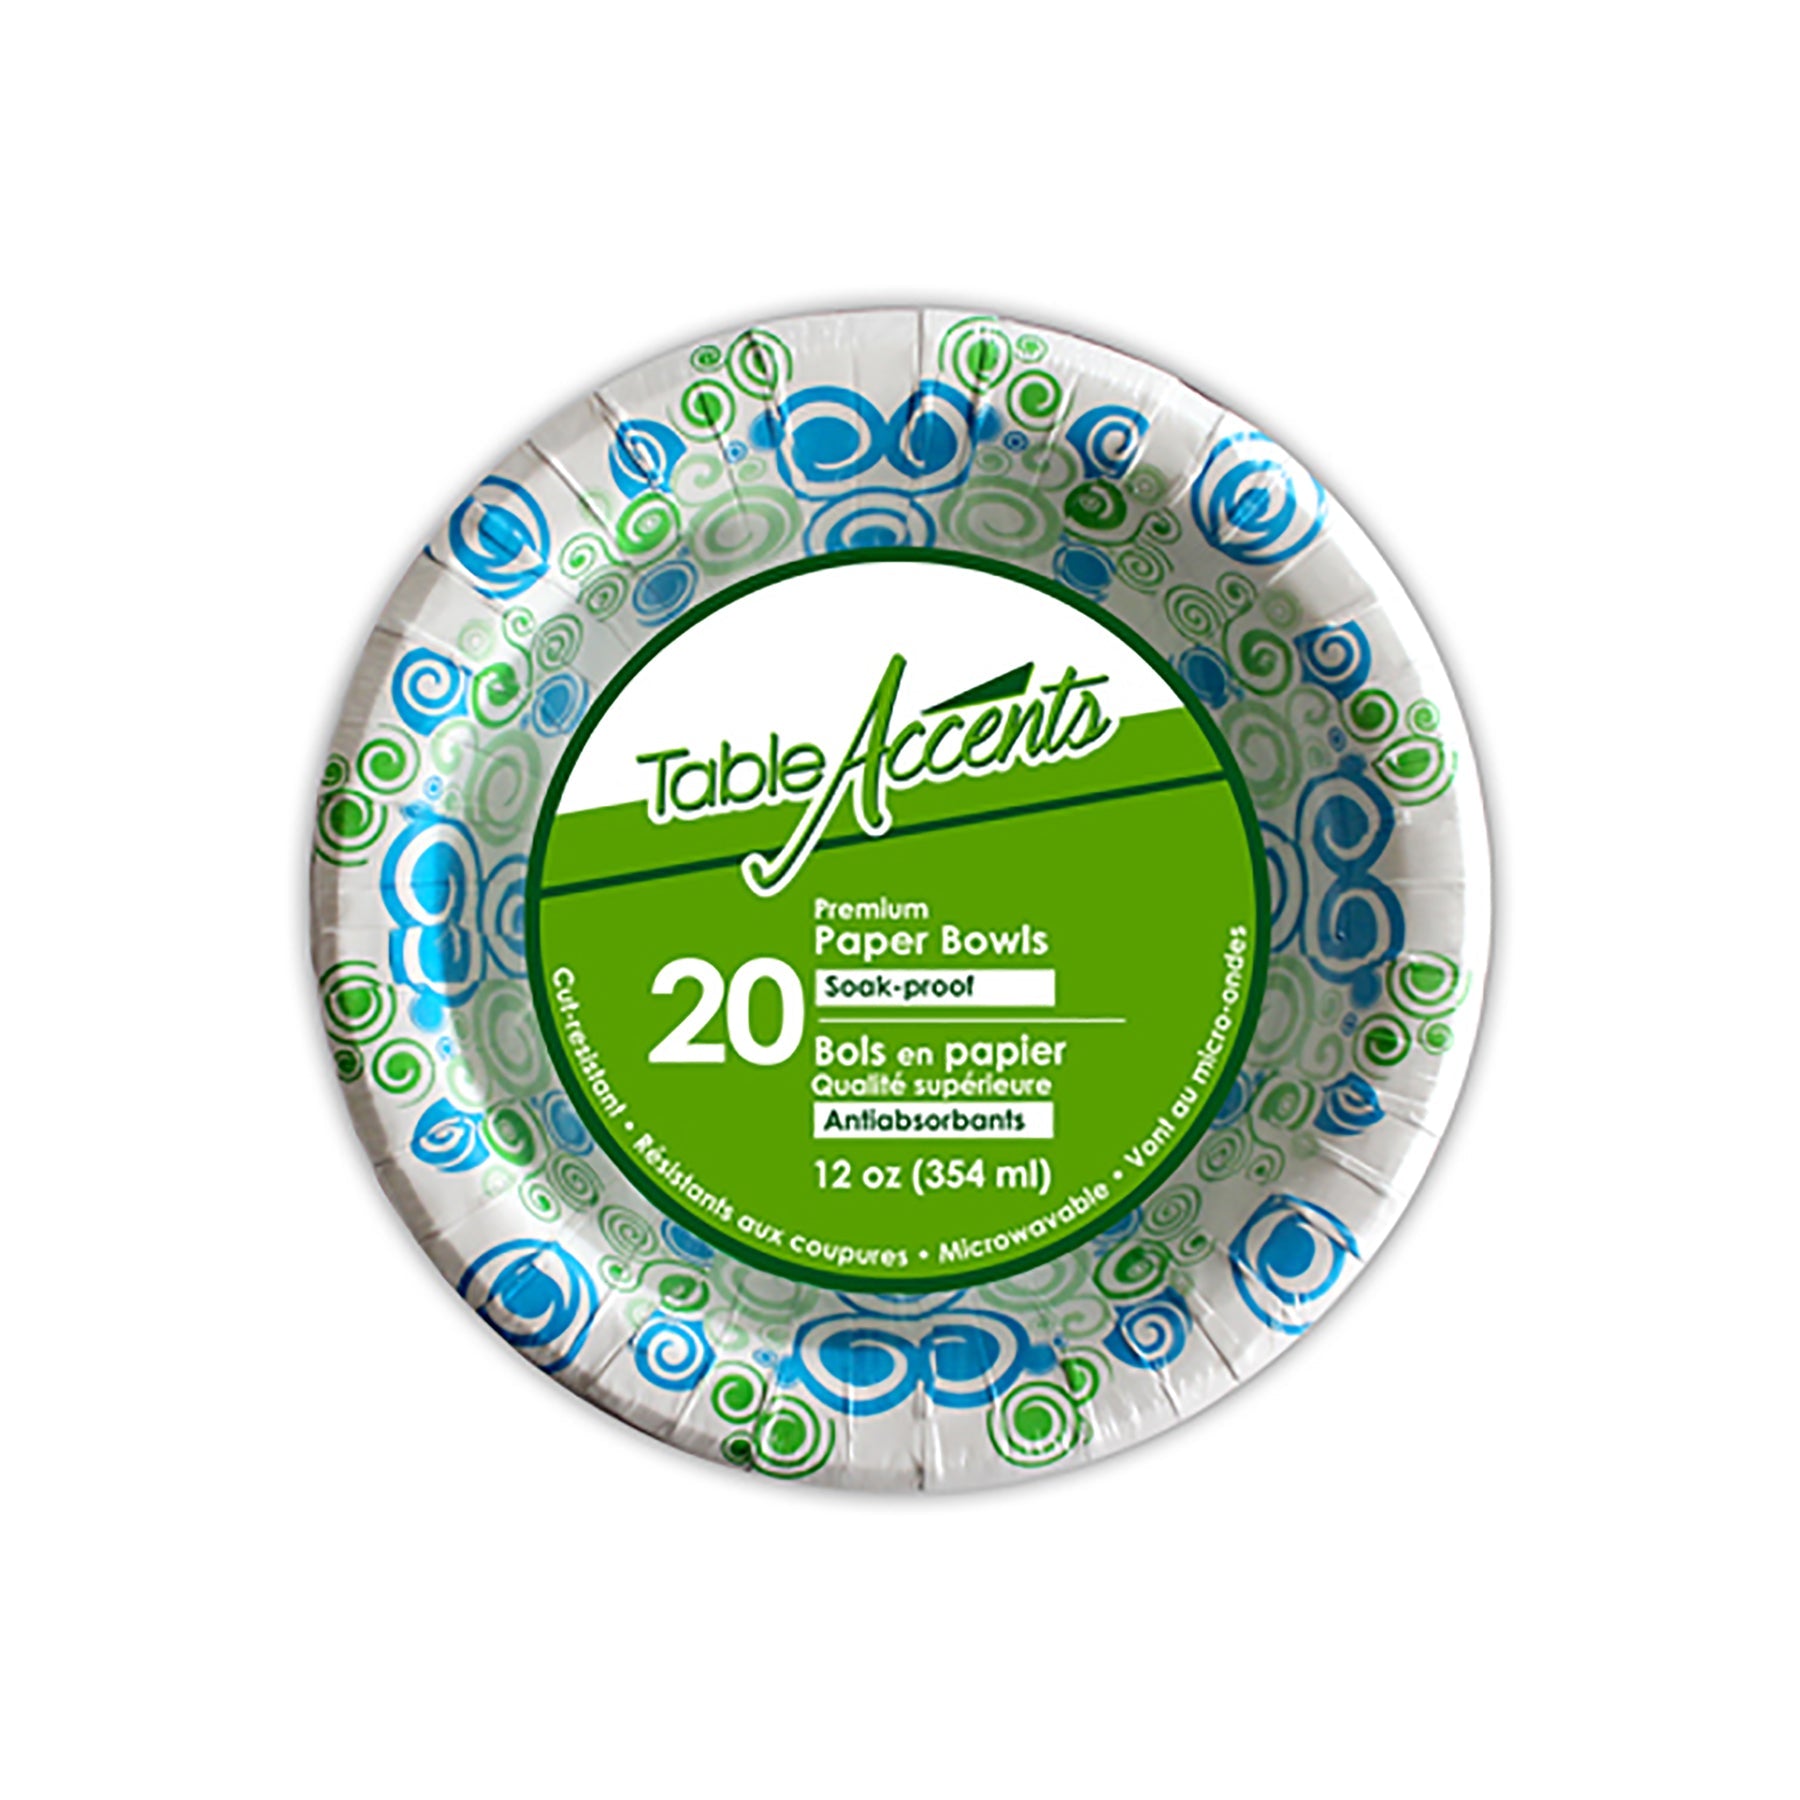 Table Accents 20 Printed Paper Bowls 12oz